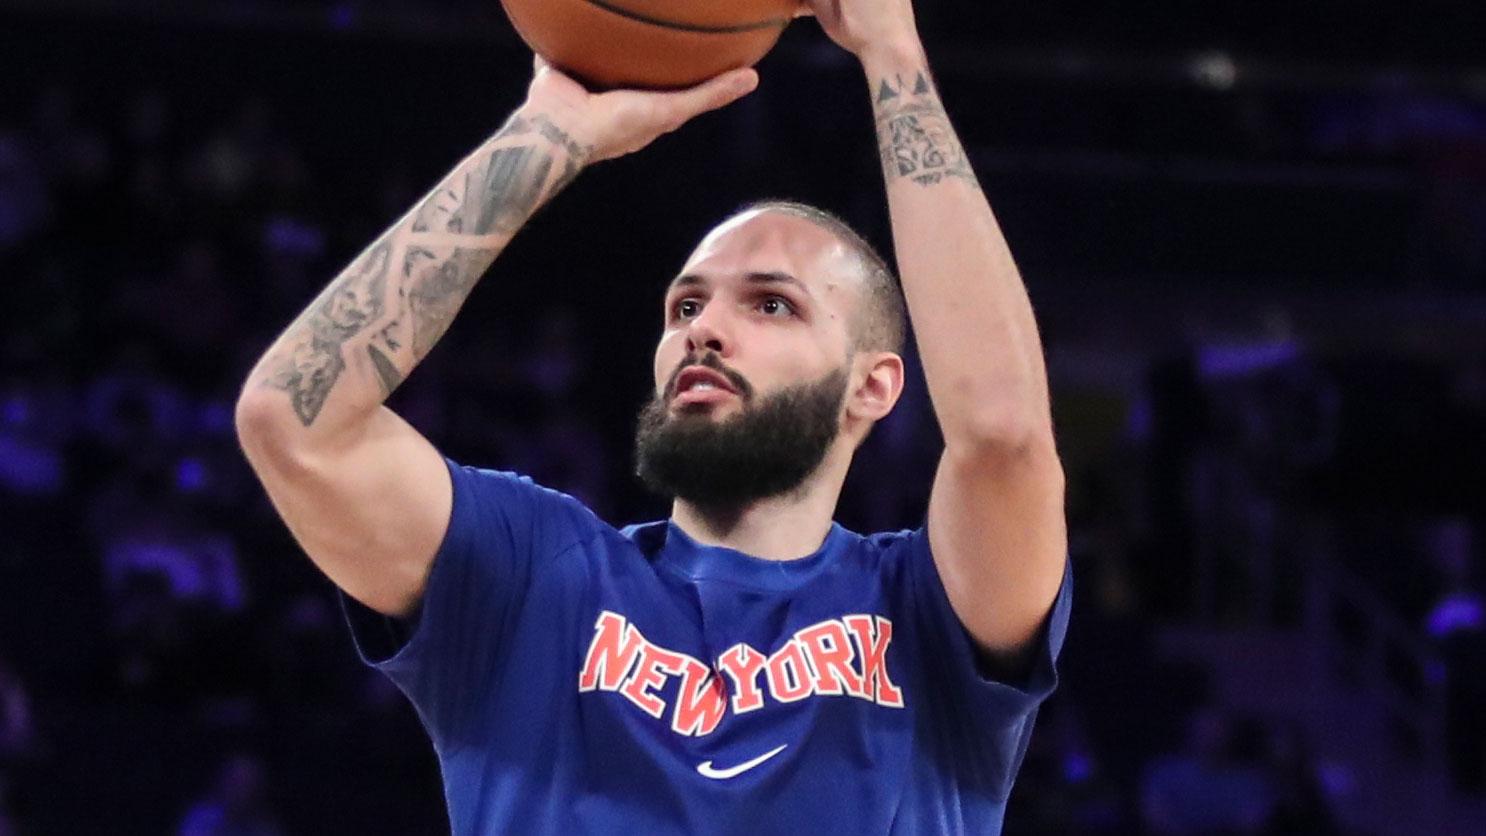 Dec 21, 2021; New York, New York, USA; New York Knicks forward Evan Fournier (13) during warmups prior to the game against the Detroit Pistons at Madison Square Garden. / Wendell Cruz-USA TODAY Sports